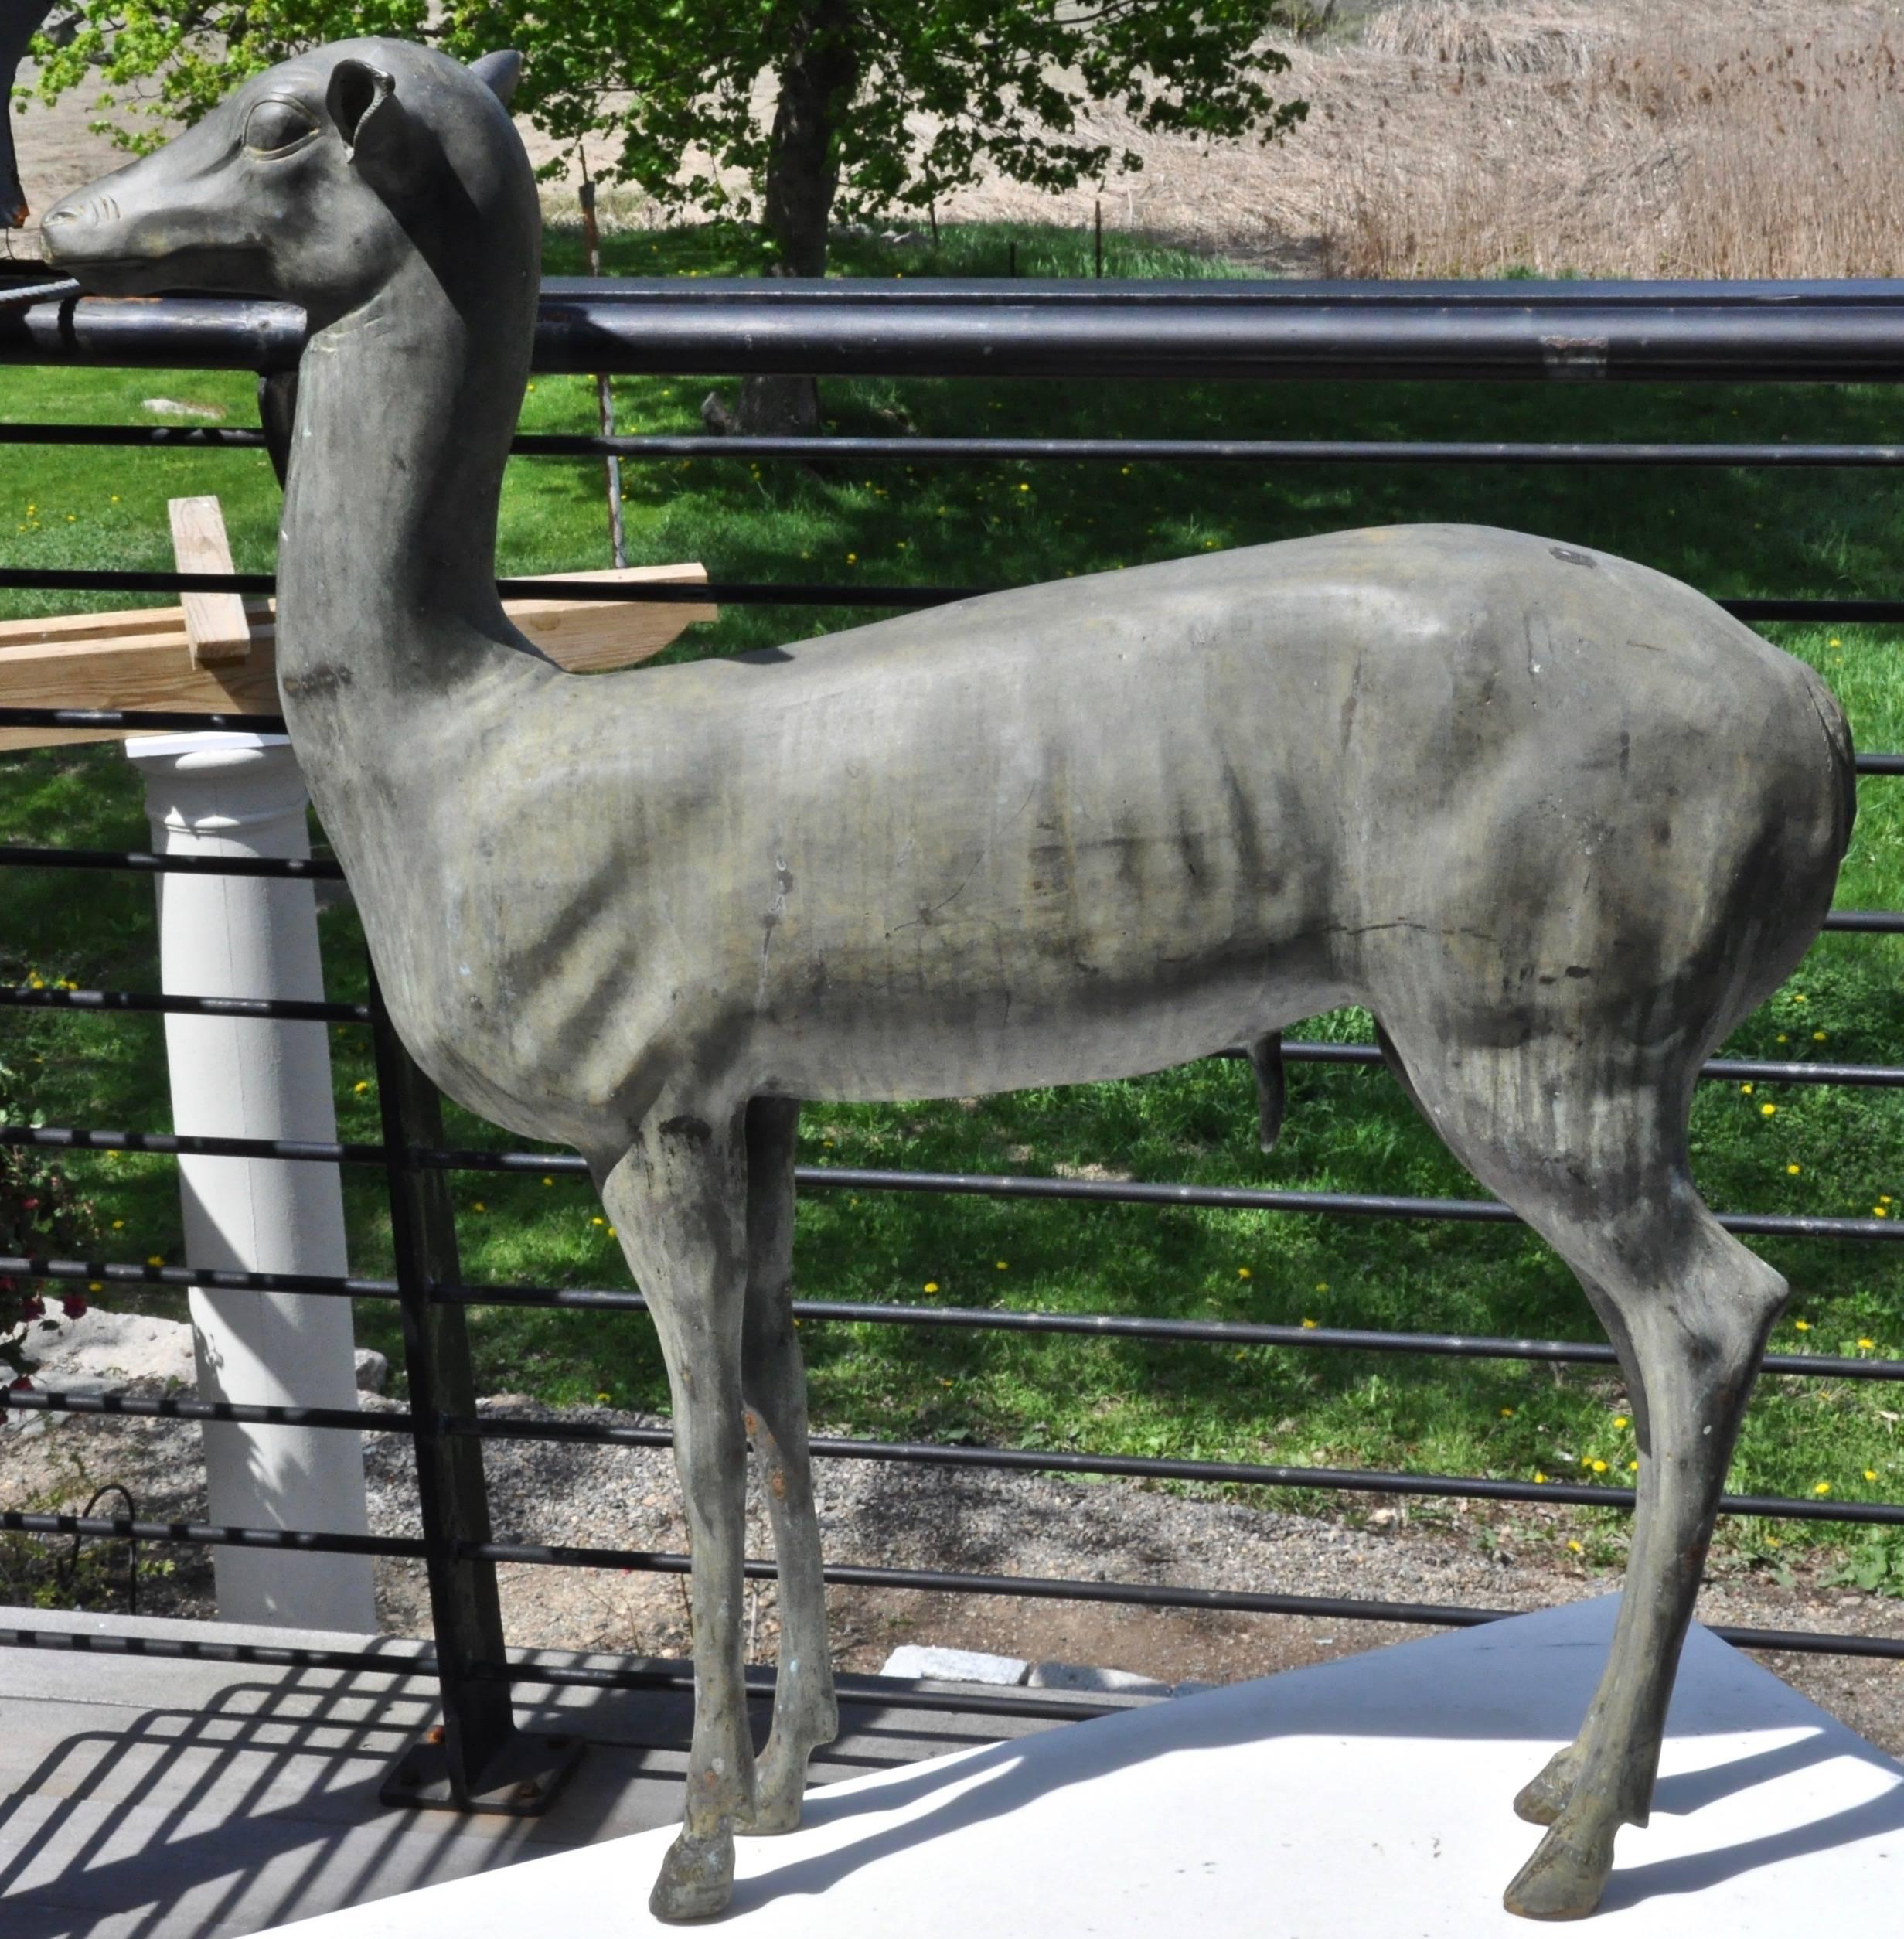 A realistic patinated bronze sculpture of a deer, copying the famous deer of Pompeii, late 19th century.

Note: A cast fawn like this one was sold at Sotheby's in 2007. In the auction listing, which attributed the casting to the F. Chiurazzi